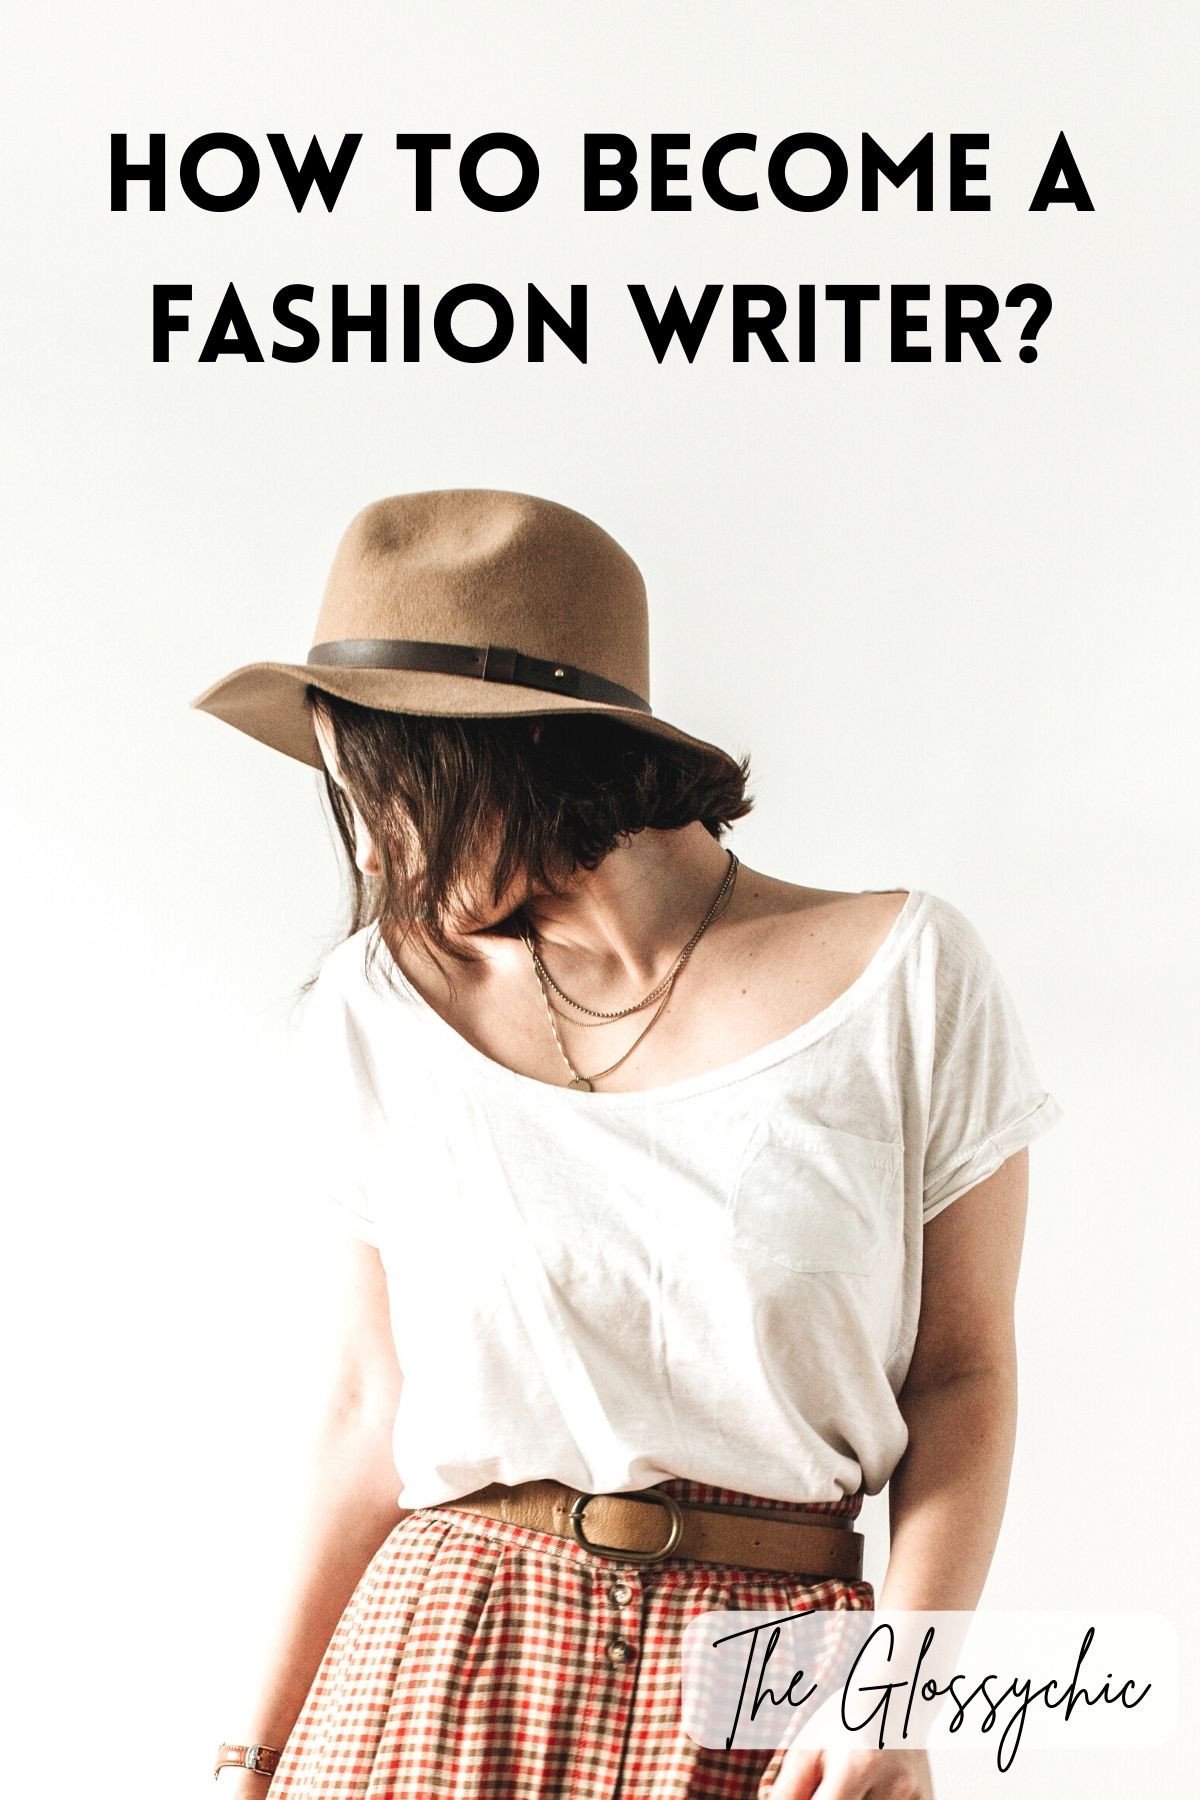 How To Become A Fashion Writer?